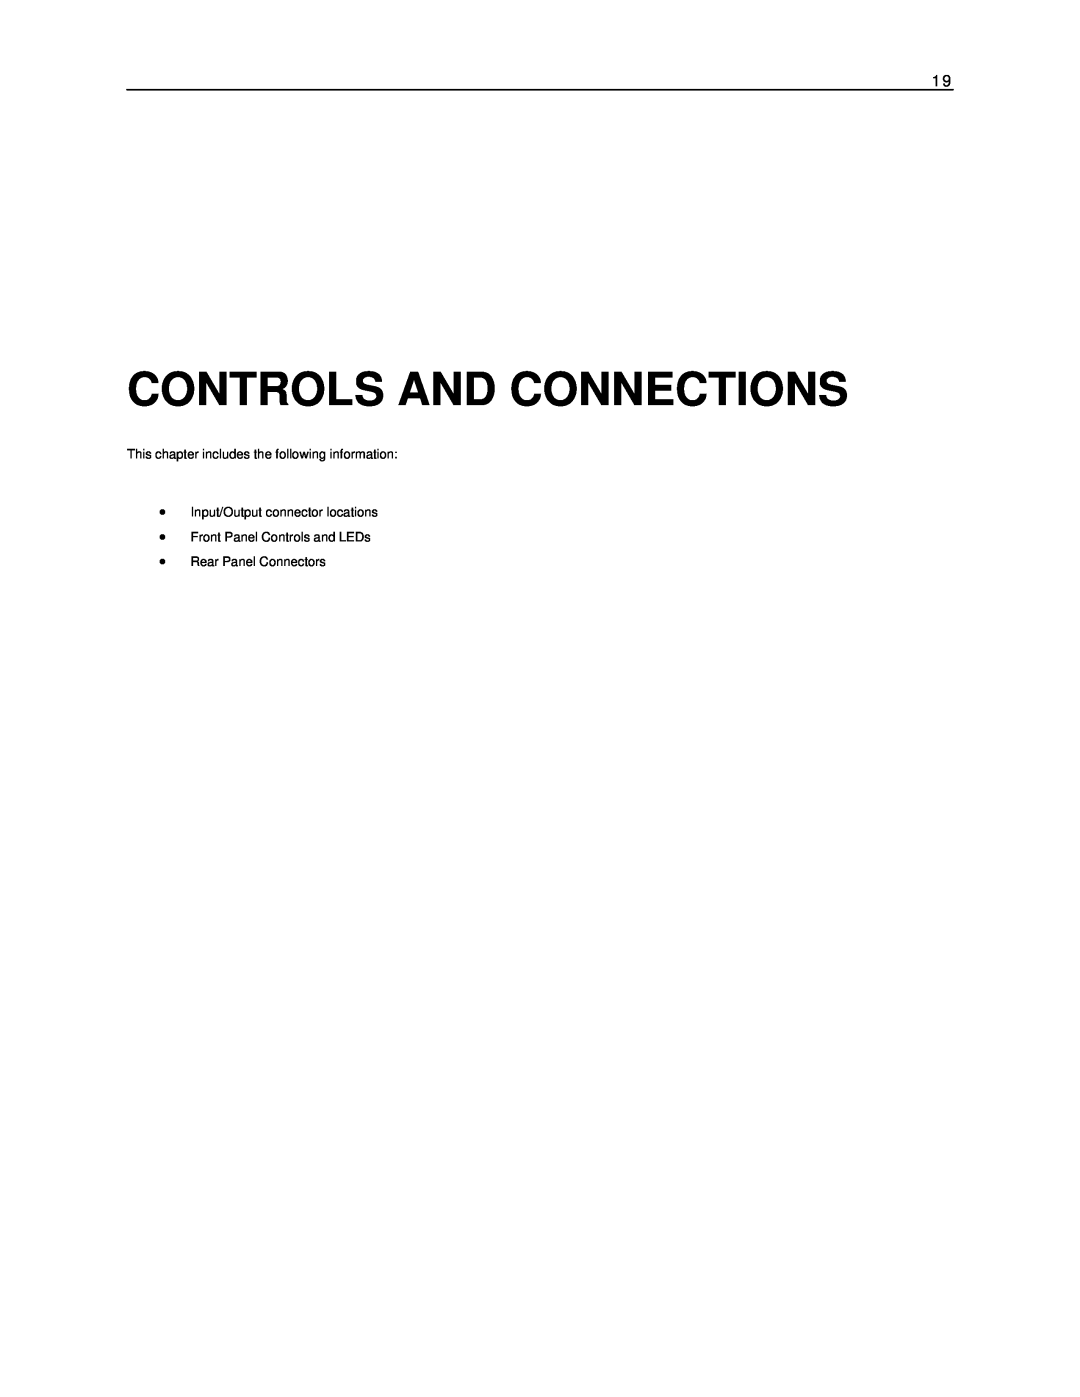 Toshiba NVS16-X, NVS32-X Controls And Connections, This chapter includes the following information, Rear Panel Connectors 